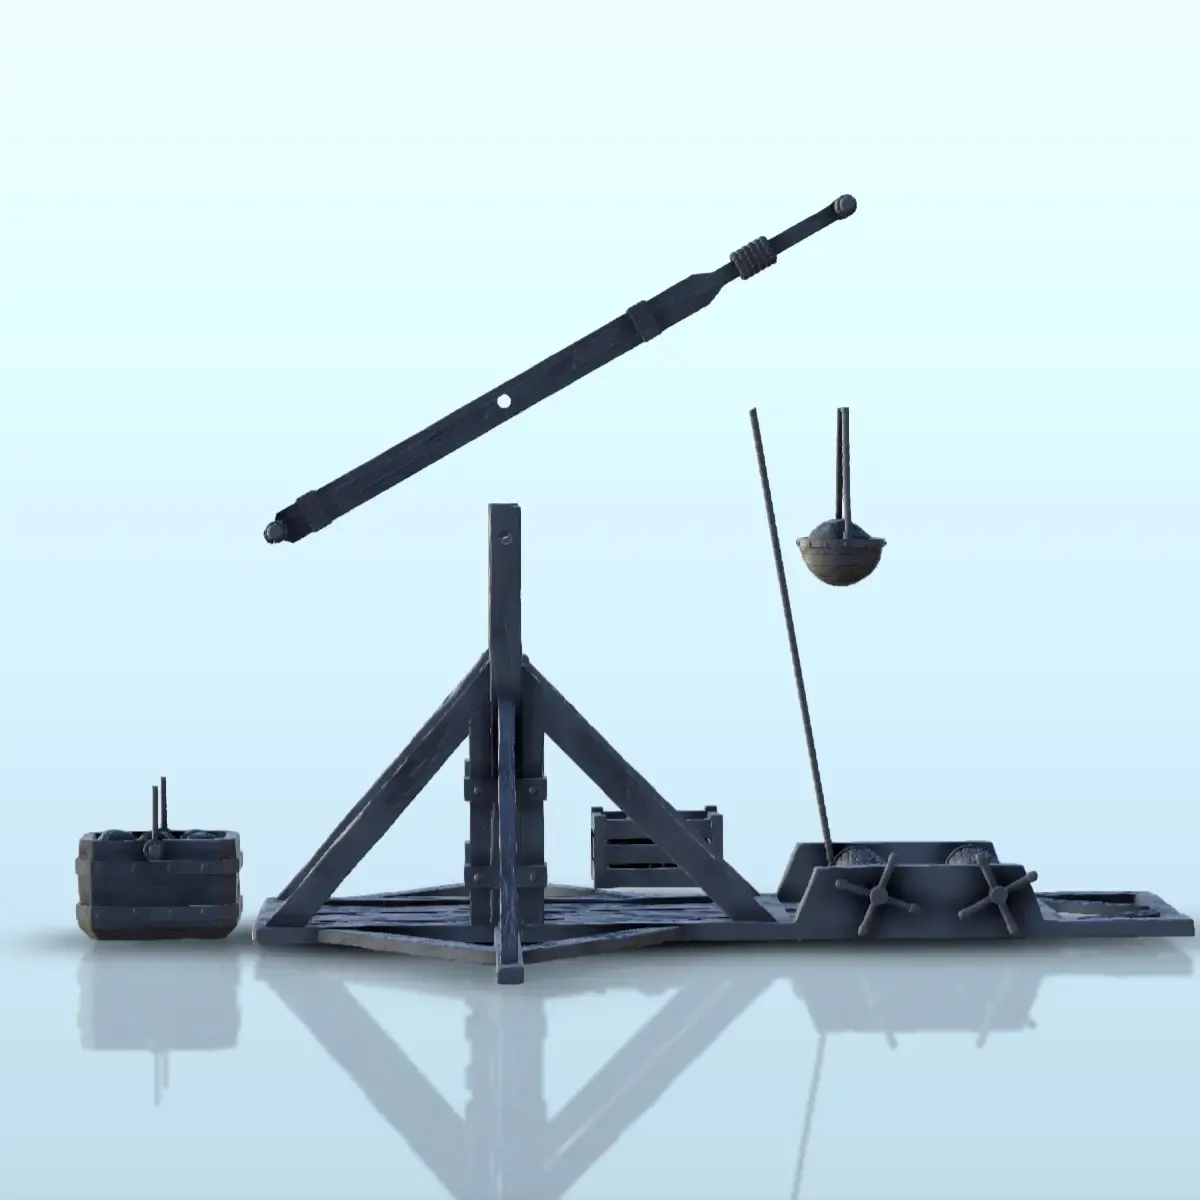 Medieval trebuchet with stones and counterweights (4) - mini